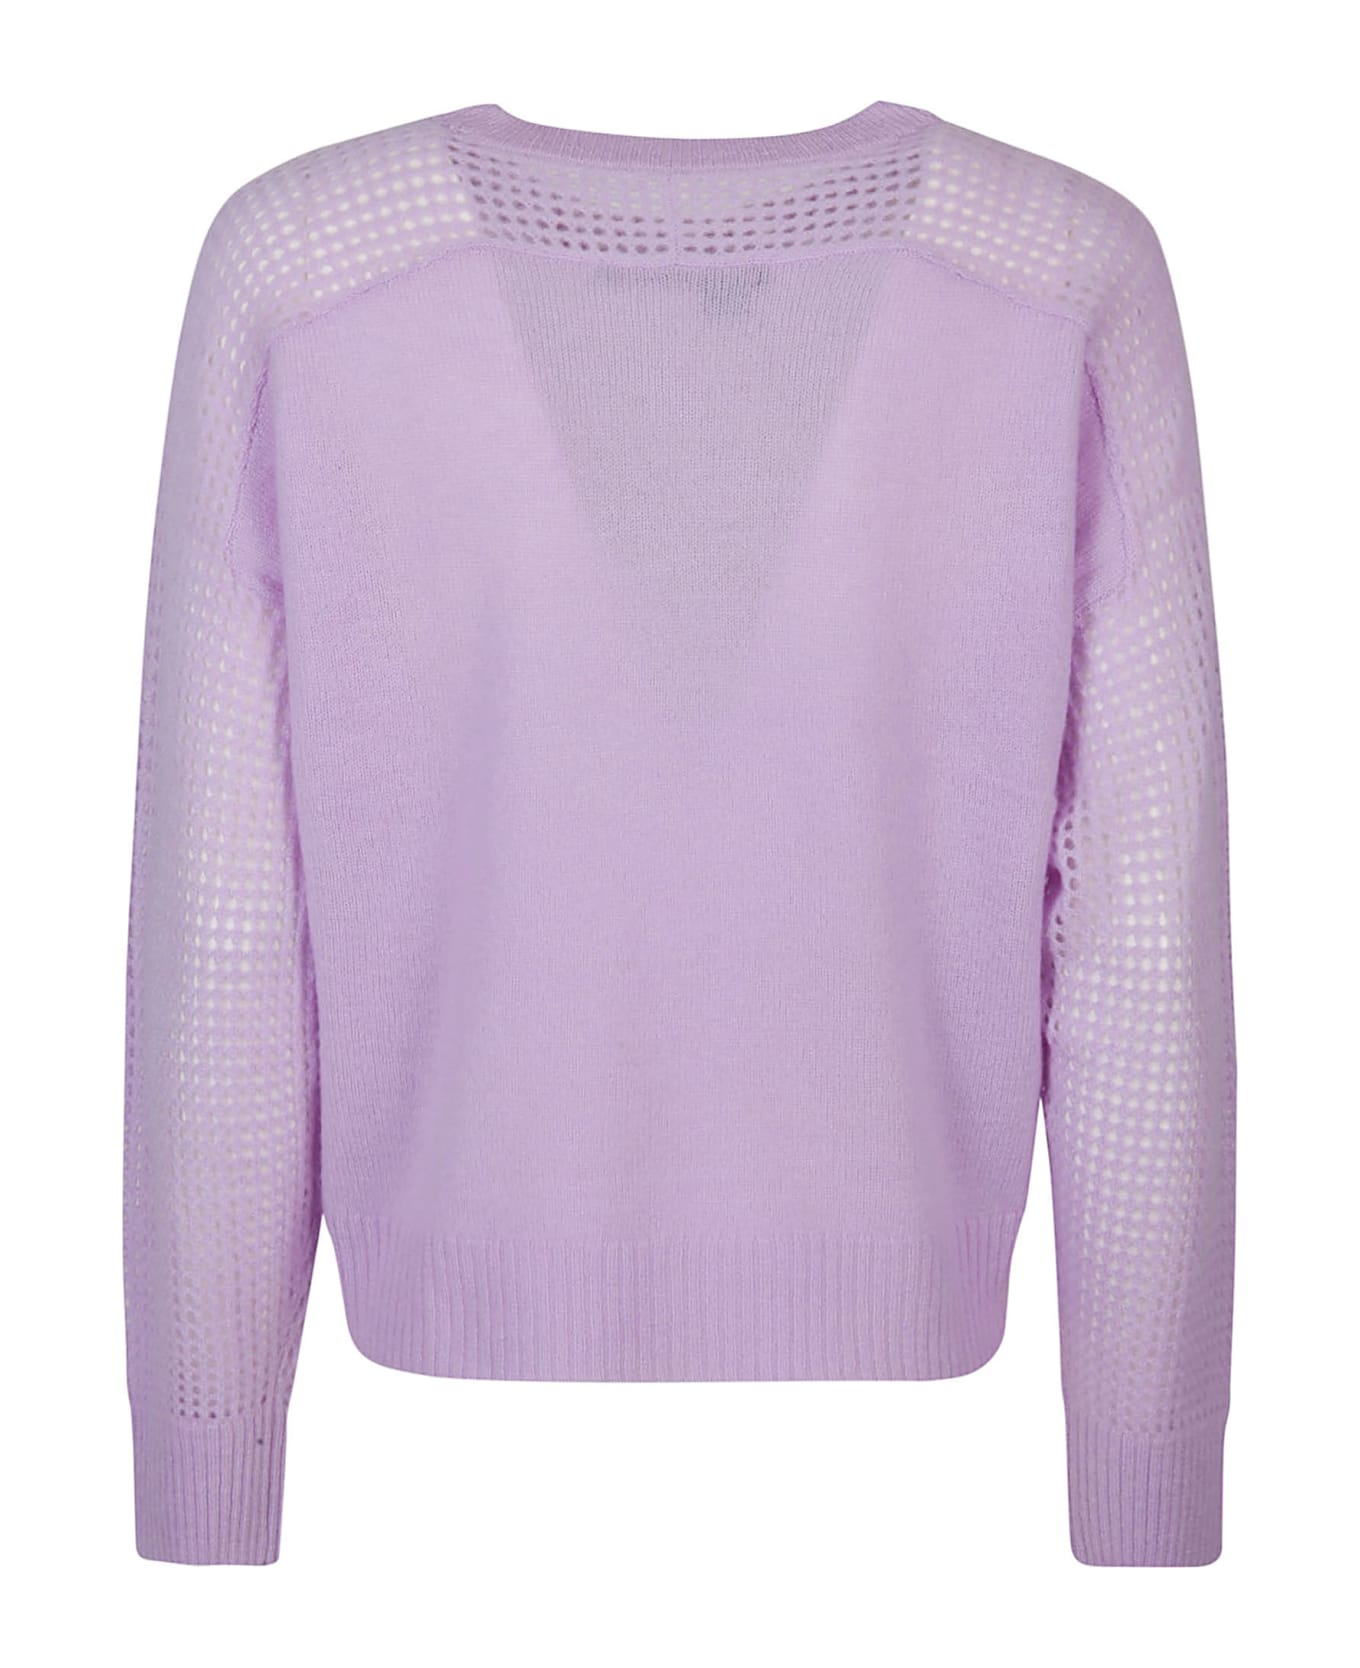 360Cashmere Riley Round Neck Sweater - Orchid